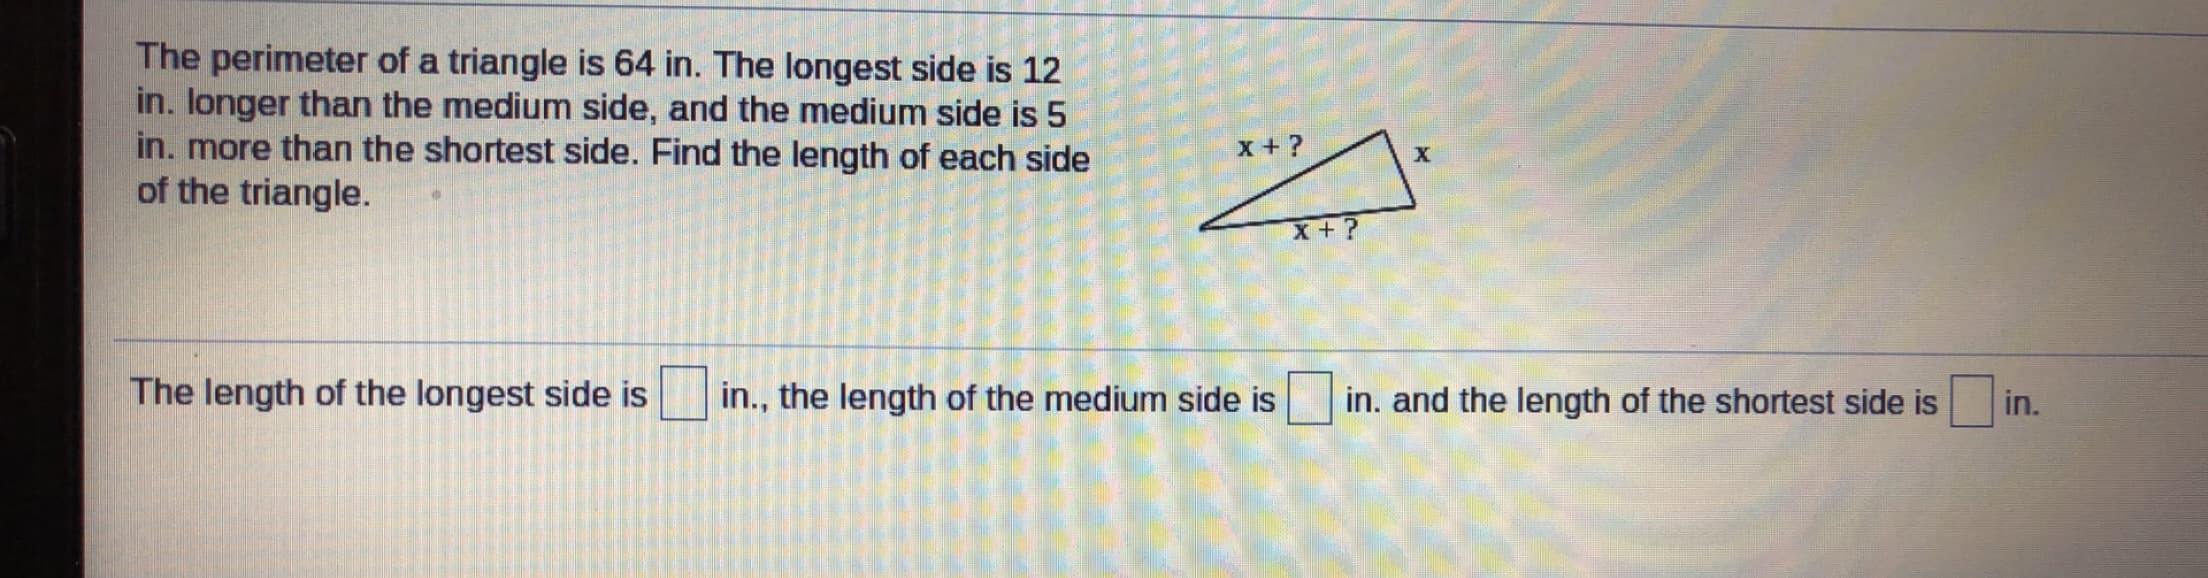 The perimeter of a triangle is 64 in. The longest side is 12
in. longer than the medium side, and the medium side is 5
in. more than the shortest side. Find the length of each side
of the triangle.
The length of the longest side is
in., the length of the medium side is
in. and the length of the shortest side is
in.
